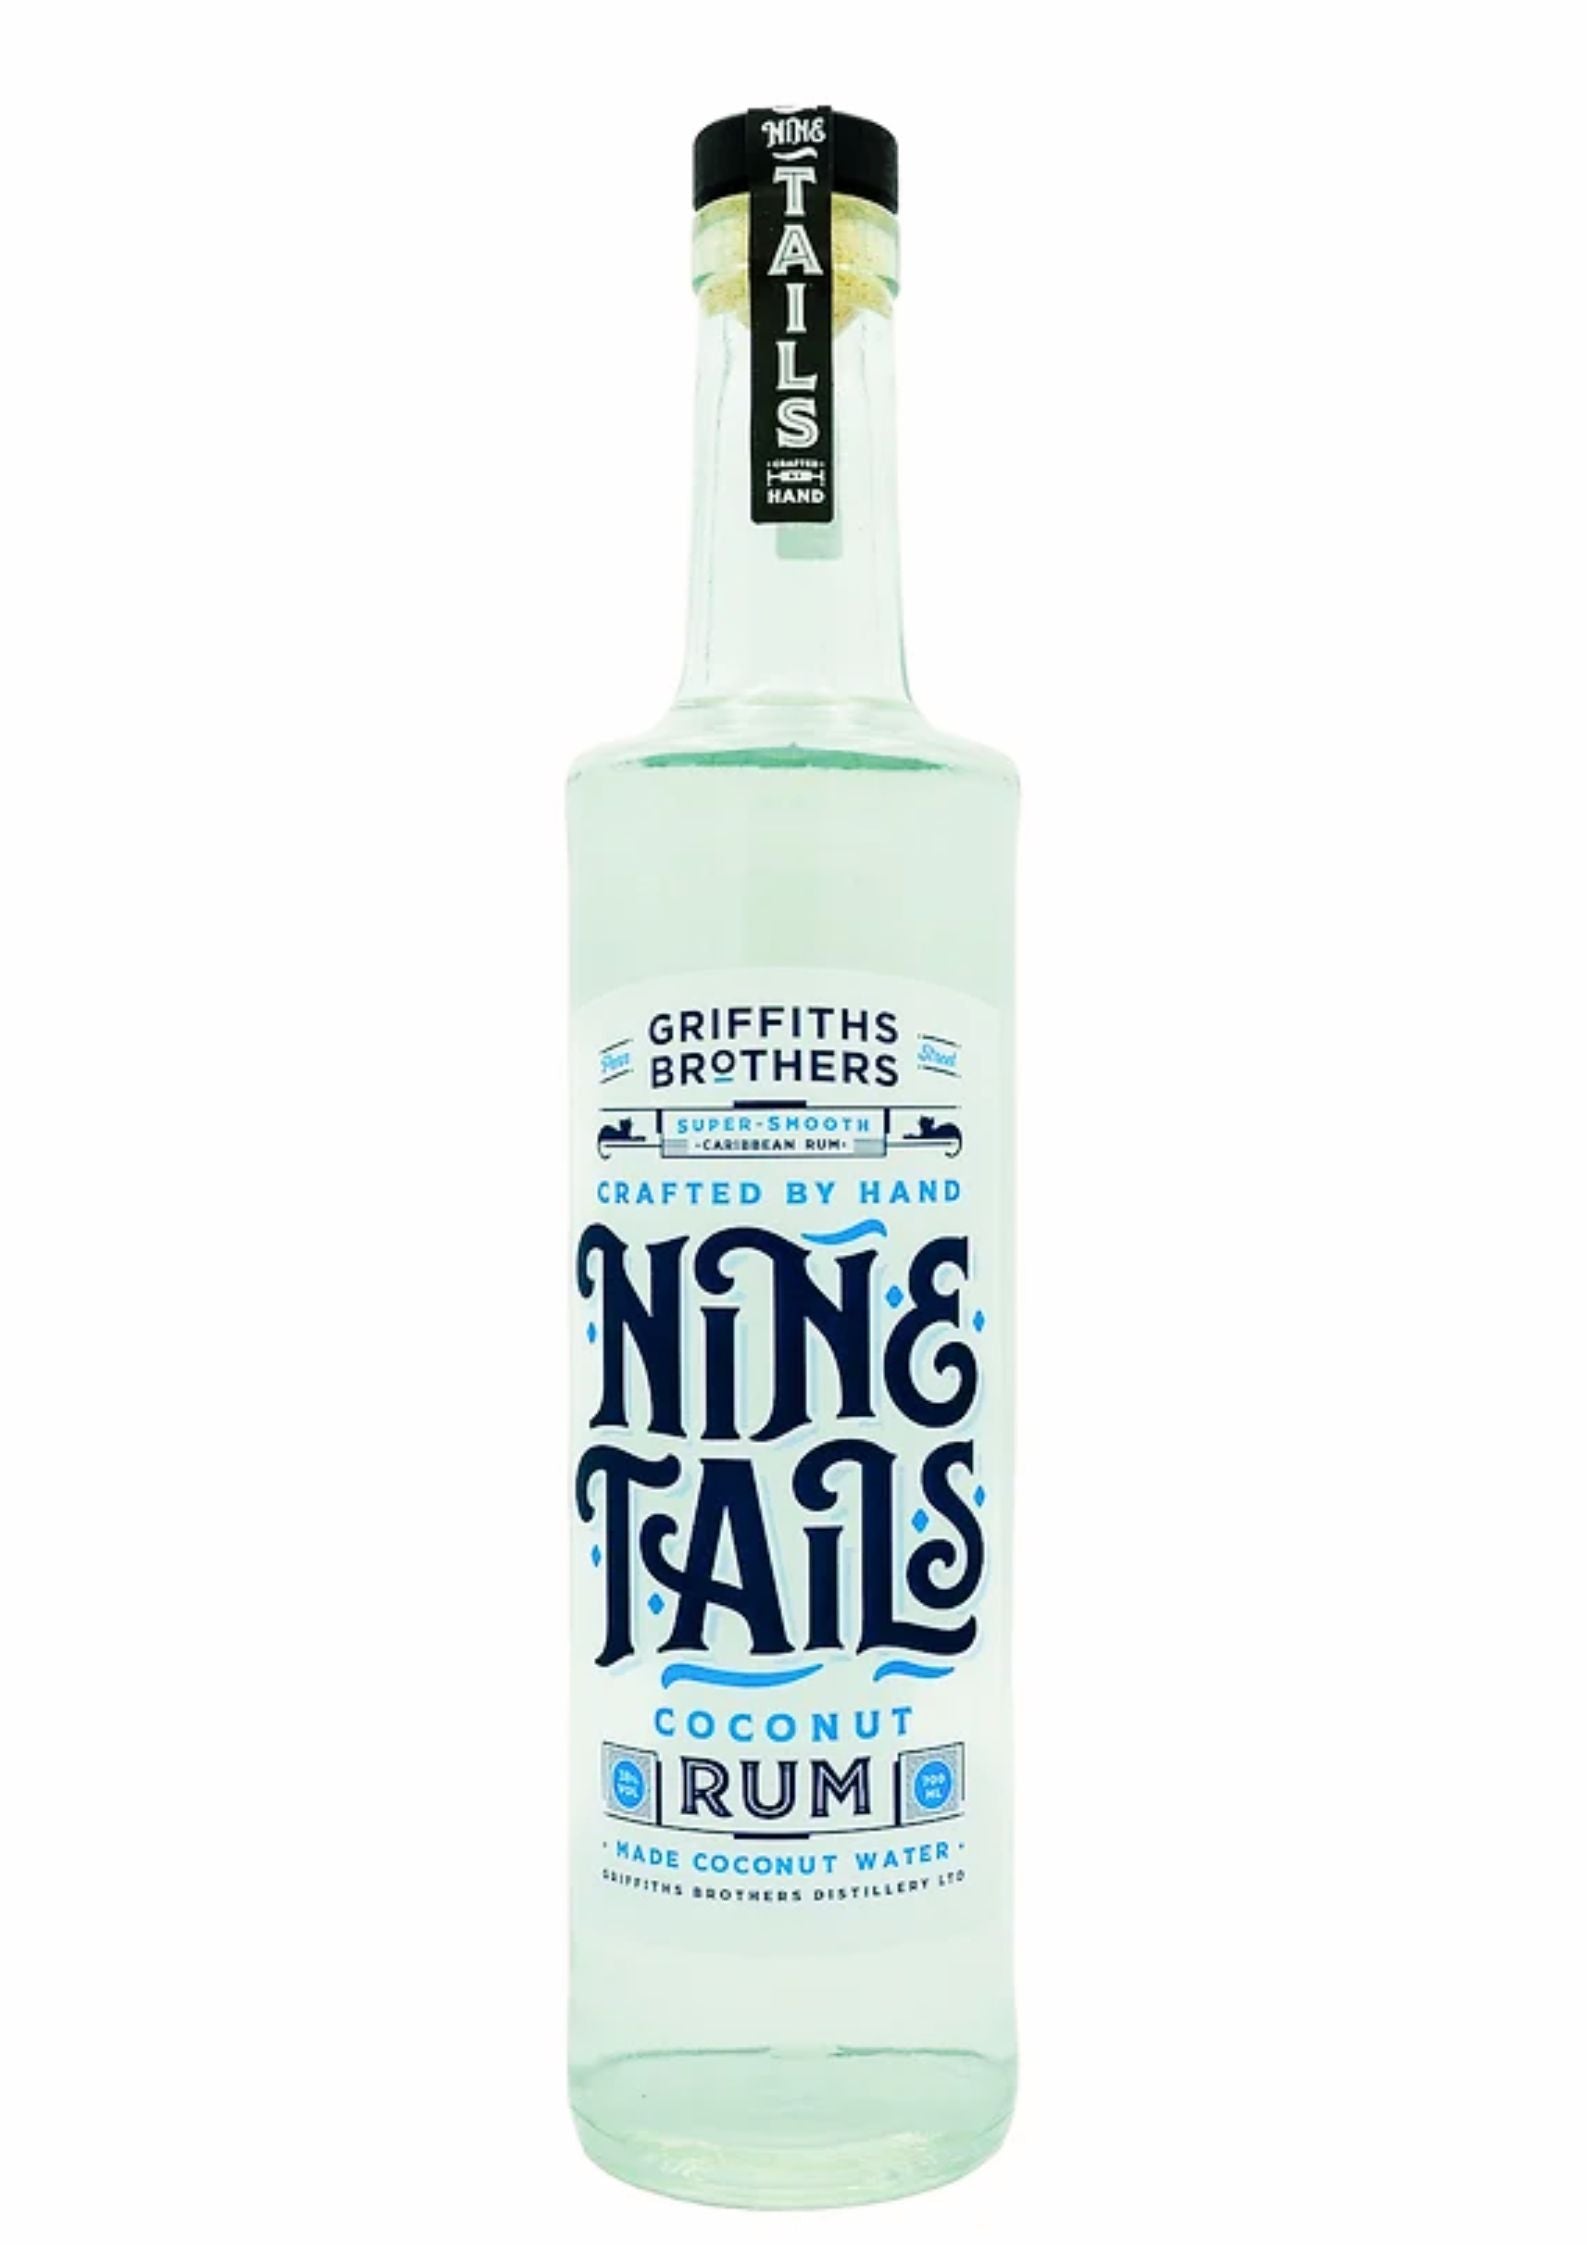 Bottle of Griffiths Brothers Nine Tails Coconut Rum, 38%